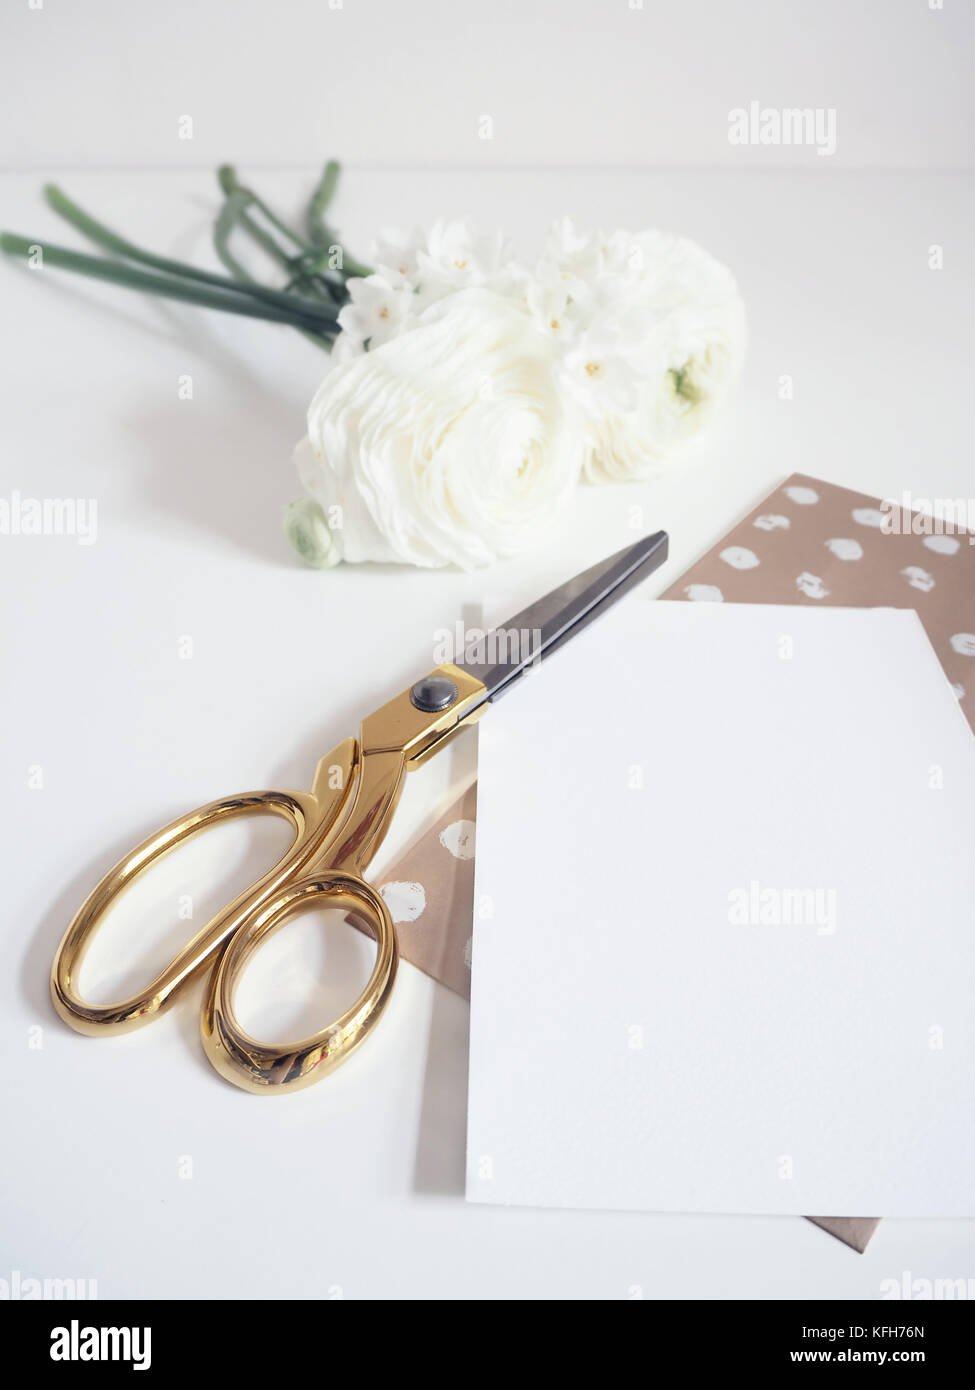 Styled stock photo. Feminine digital product mockup with buttercup and daffodil flowers, blank list of paper and golden scissors. White background. Flat lay, top view. Stock Photo